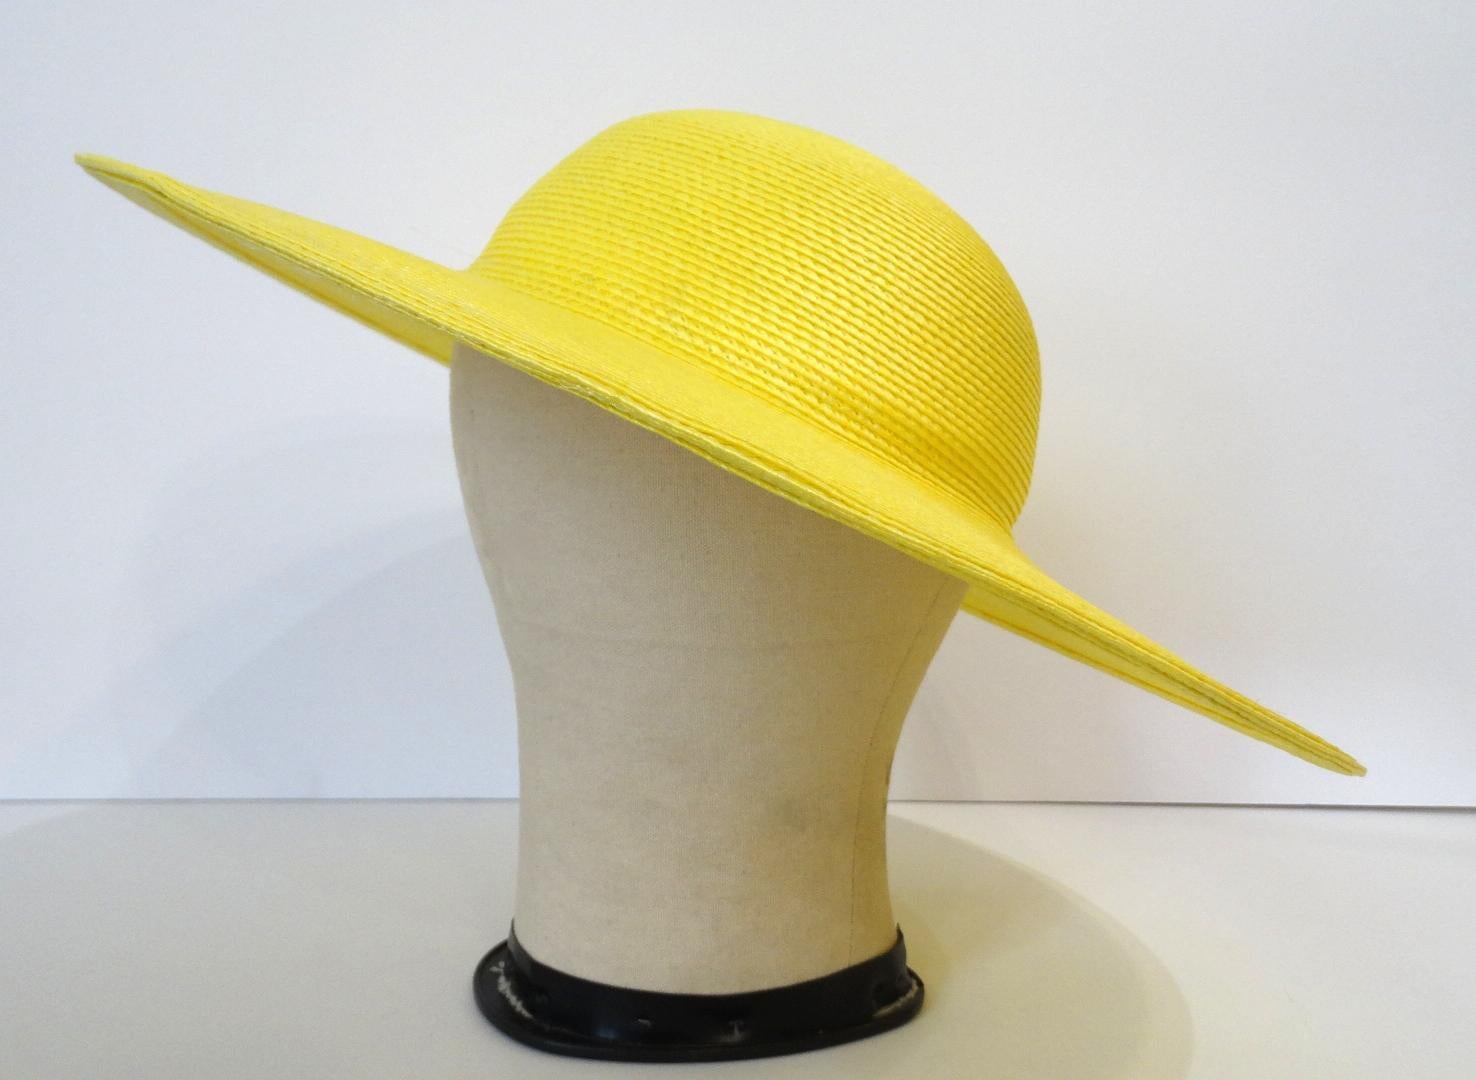 Channel Your Inner French Lady With This Parisian Style Hat! Circa 1960s, this bright yellow straw hat features a classic bowler style top and a wide brim. Perfect for your next getaway or brunch! 